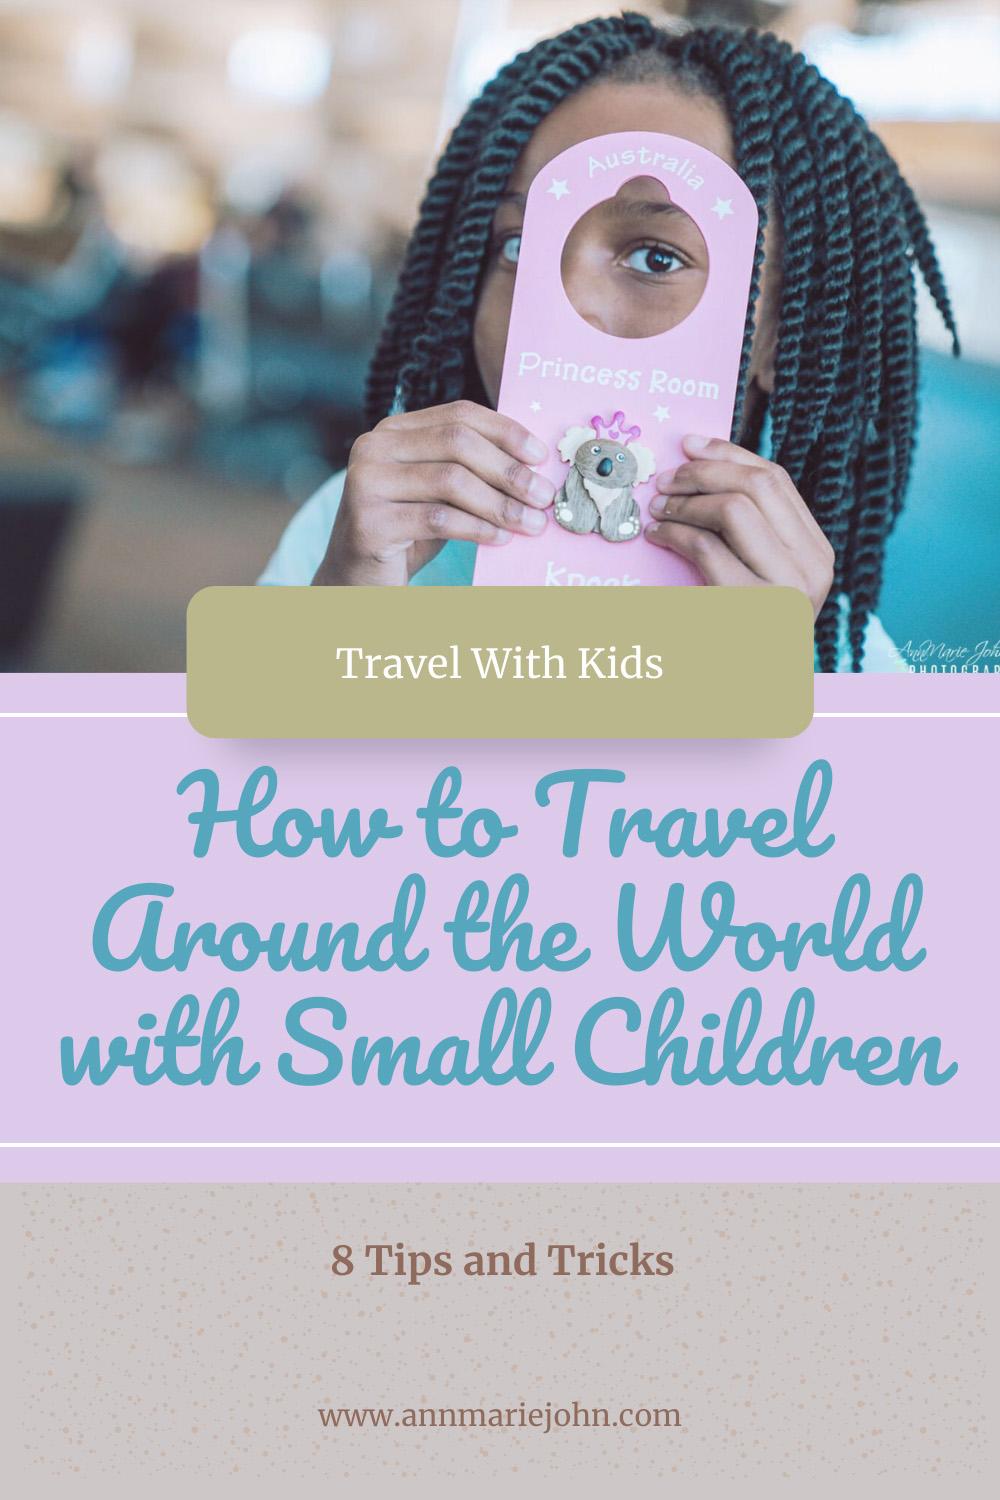 How to Travel the World with Small Children